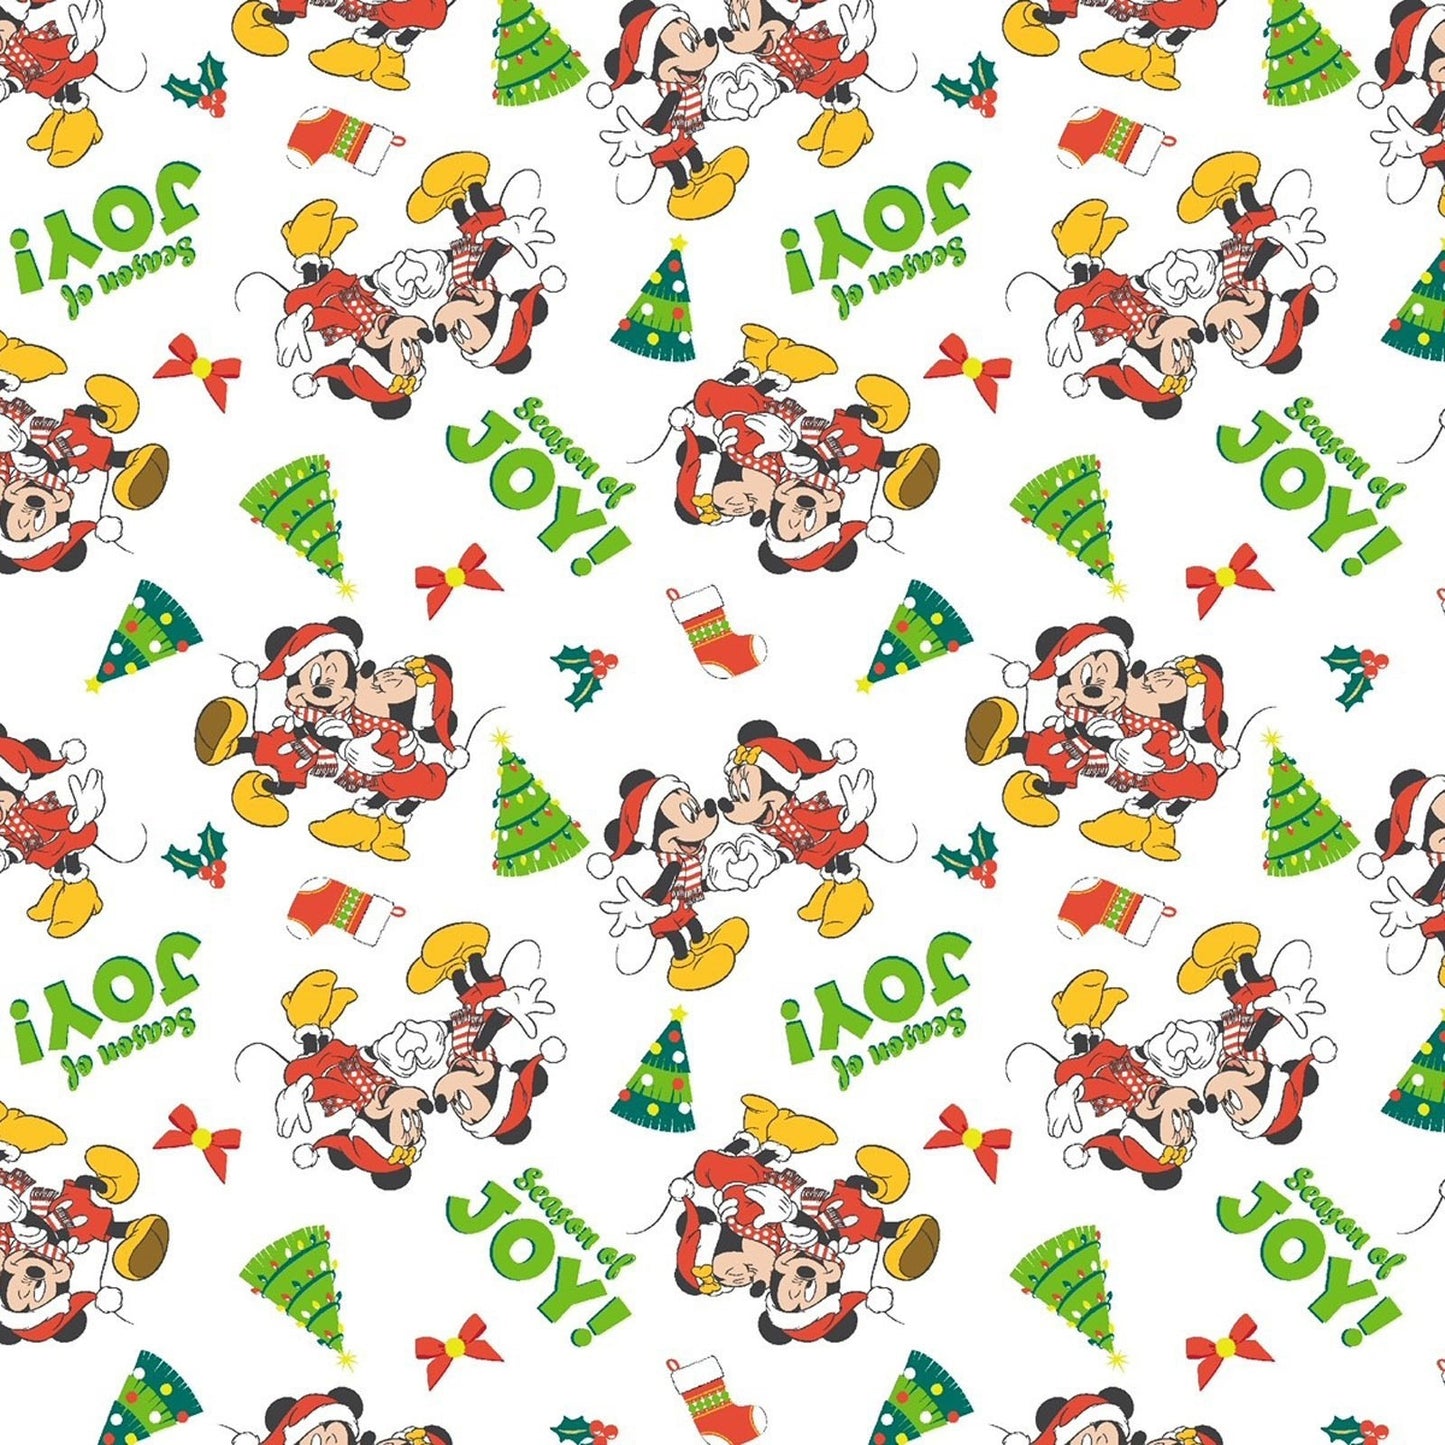 44 x 36 Licensed Mickey and Minnie Disney Christmas Springs Creative 100% Cotton